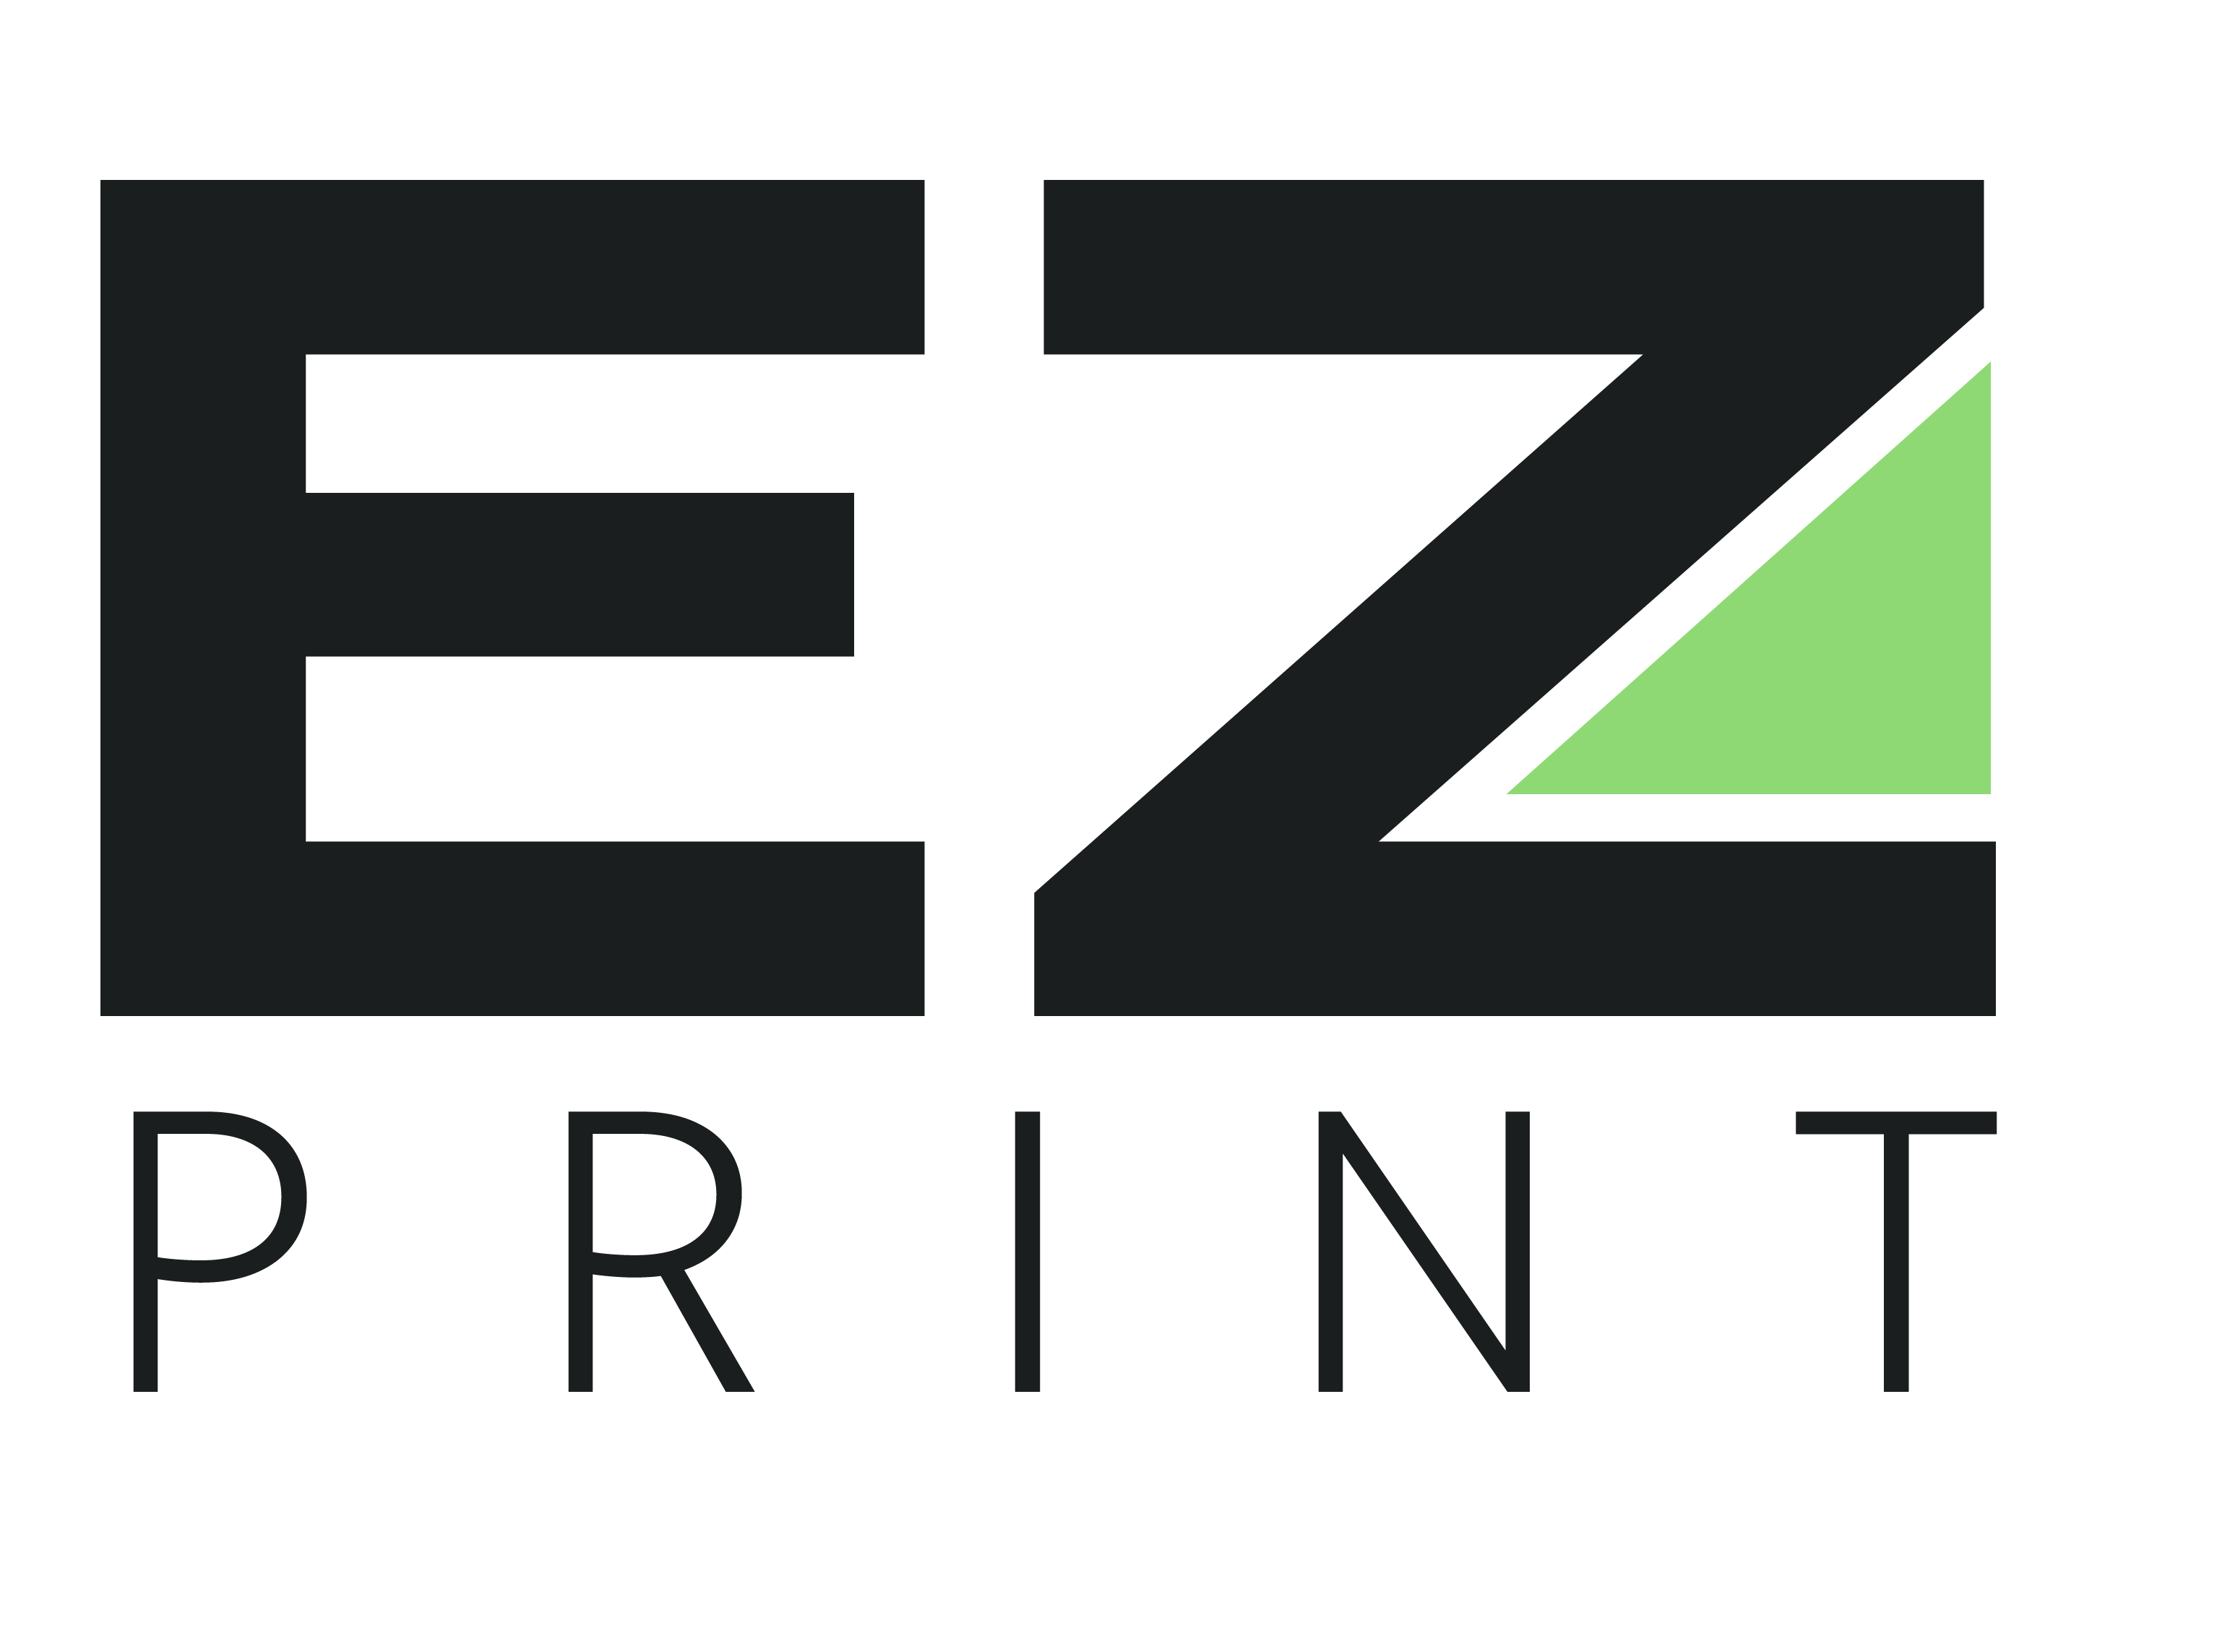 EZ Print is bringing the best marketing materials at affordable prices